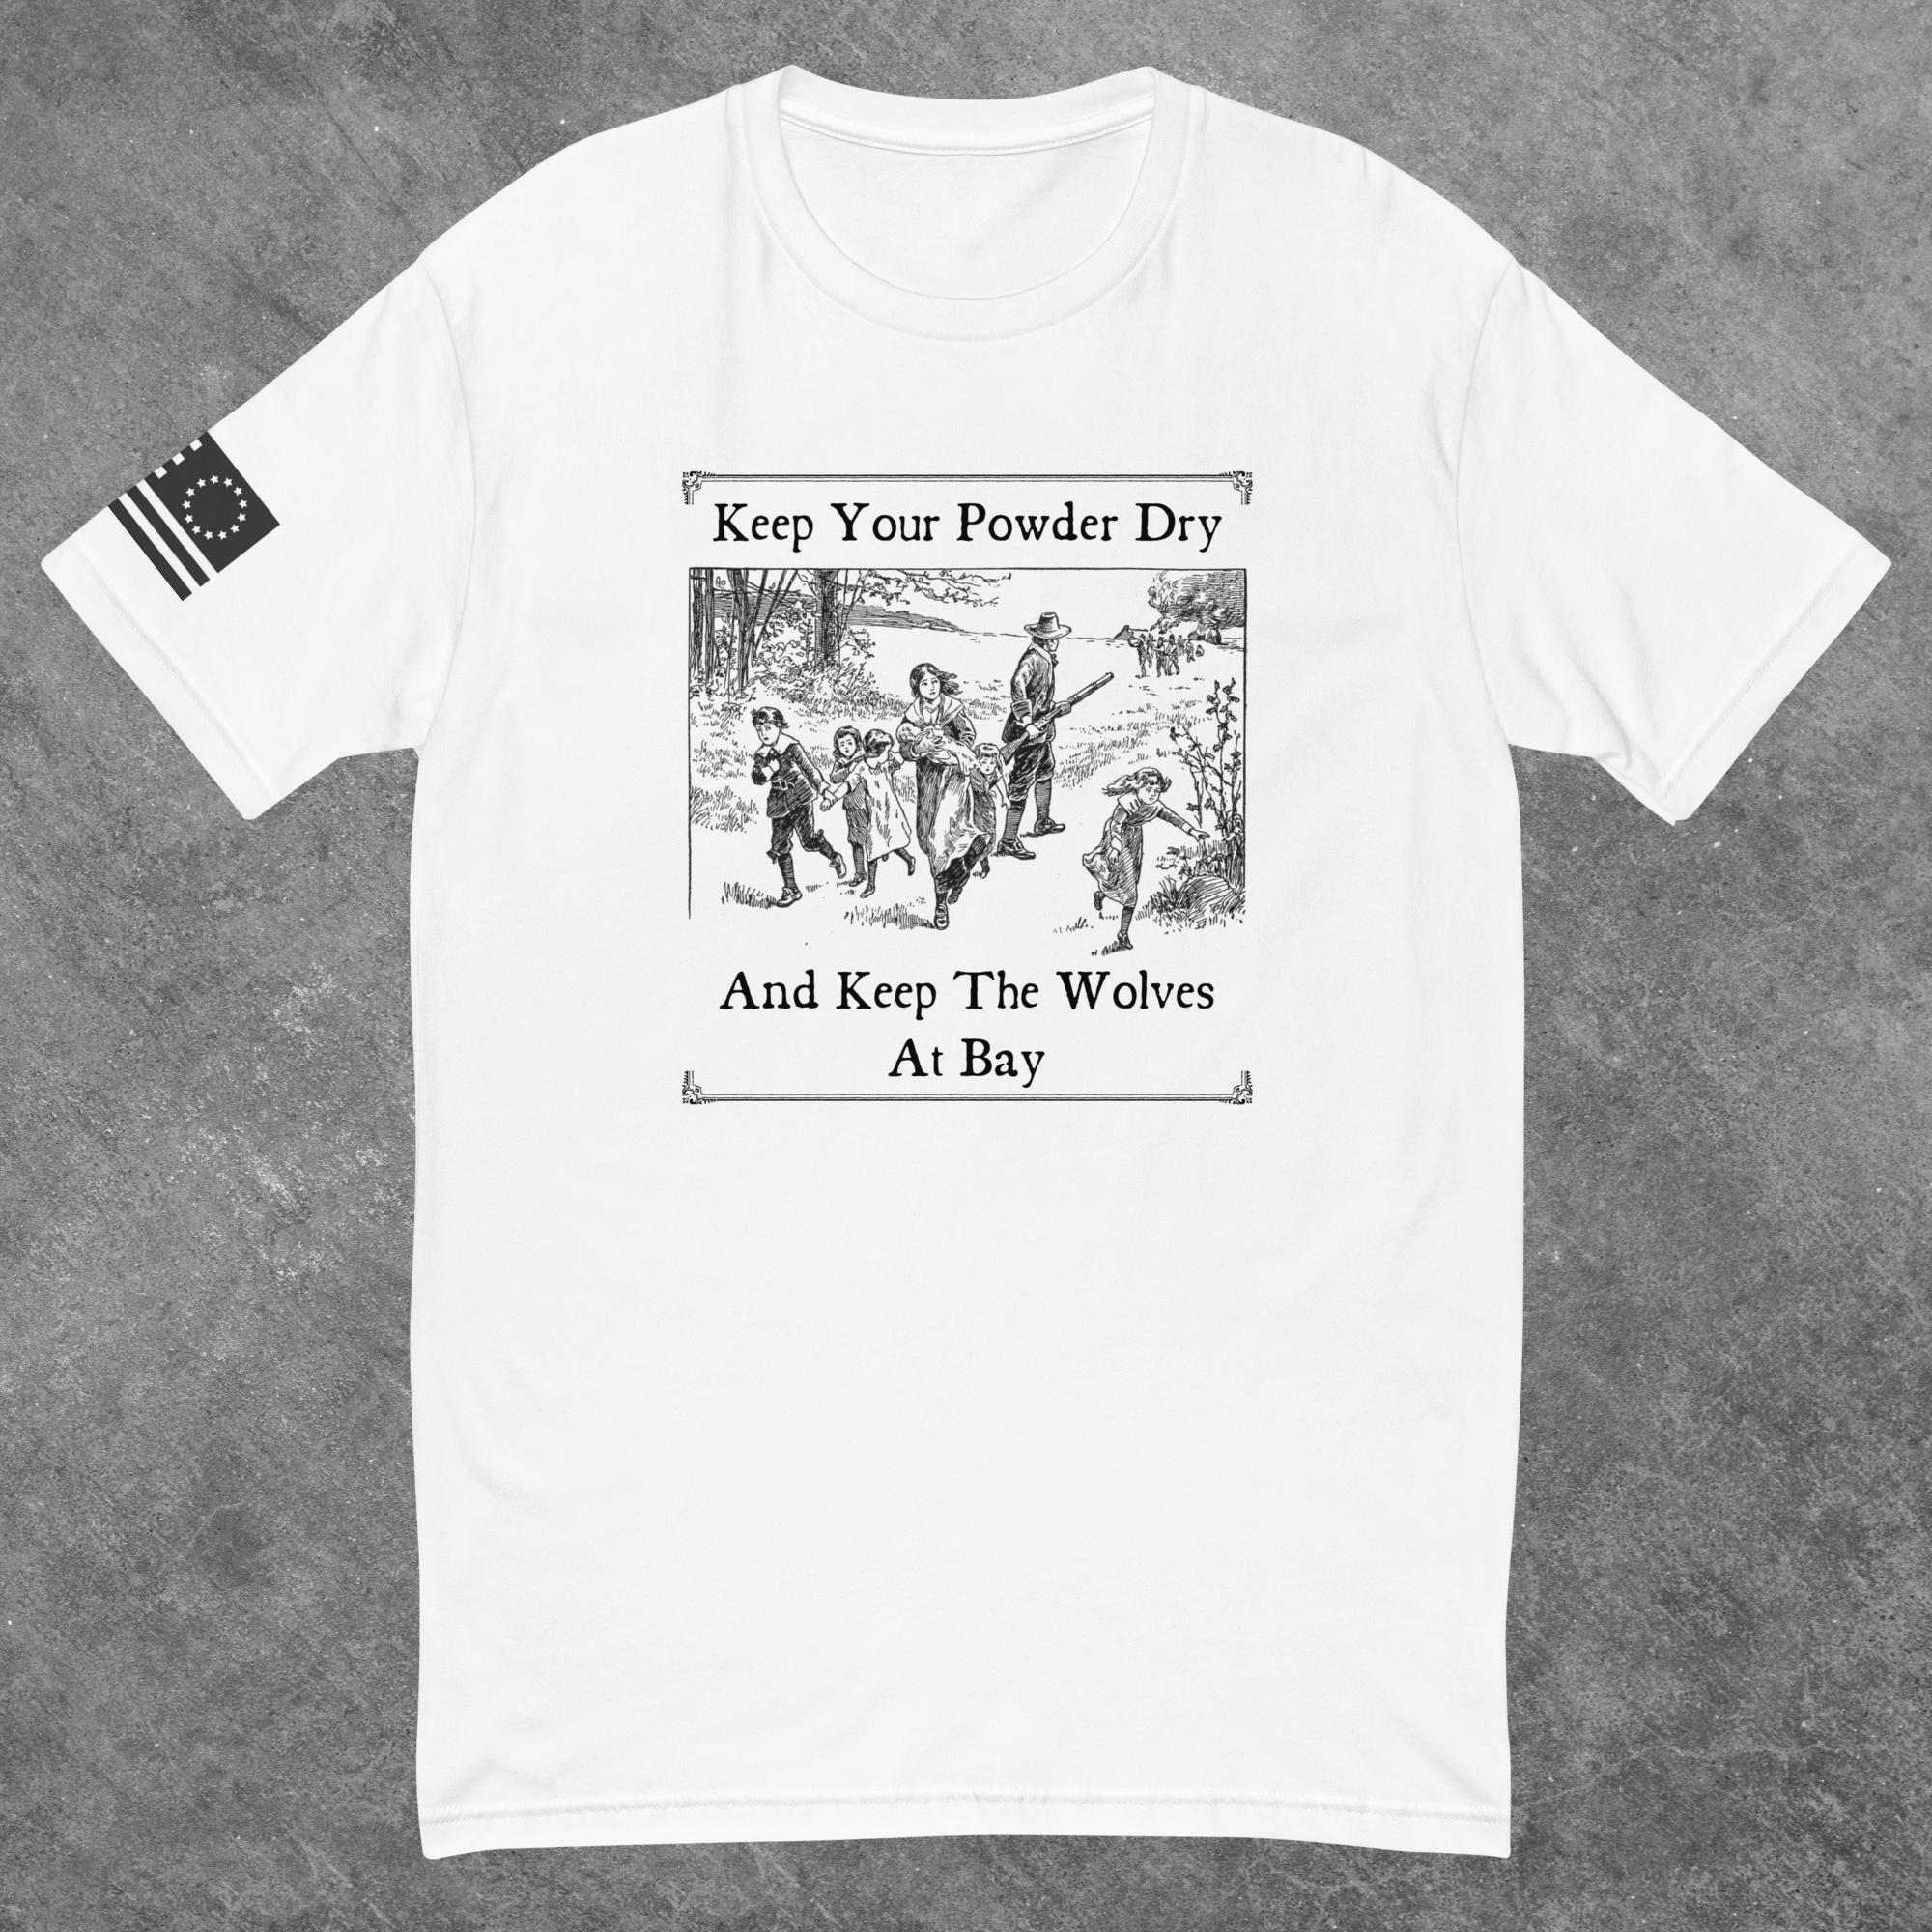 Keep Your Powder Dry - Men's Fitted T-shirt - Noblesse Oblige Apparel